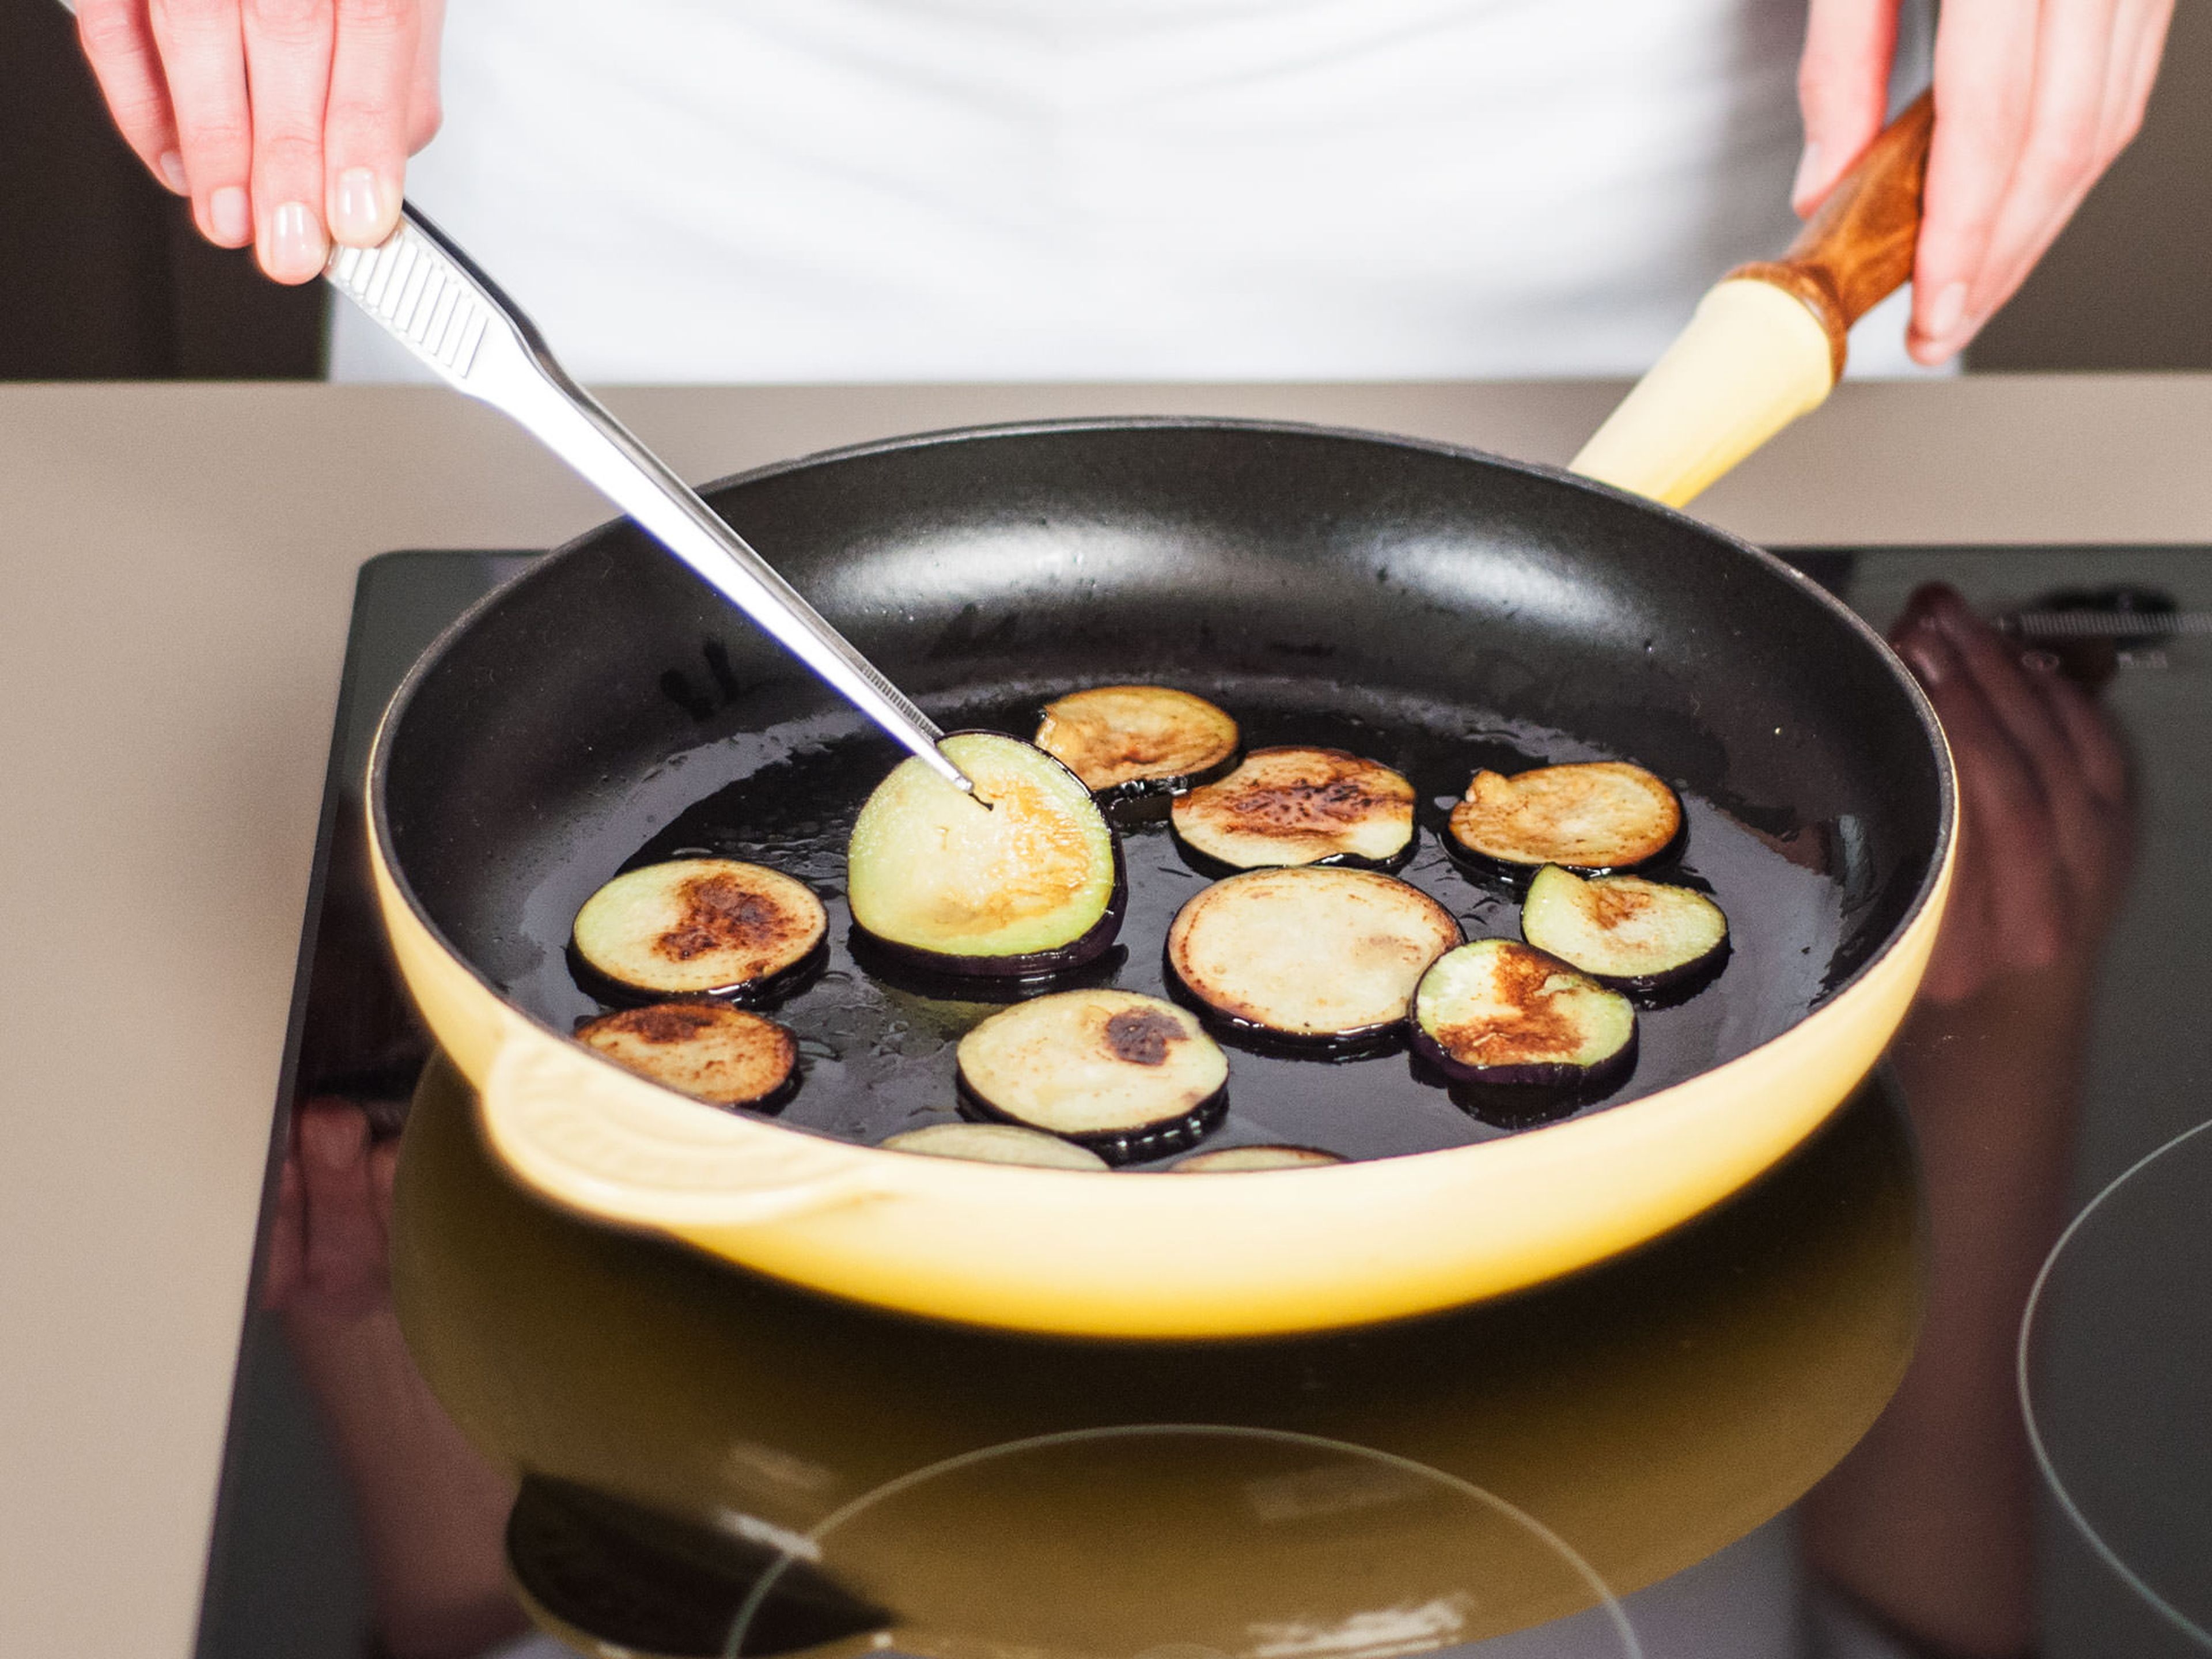 Heat some vegetable oil in a pan. Fry eggplant slices over medium heat on each side for approx. 3 – 5 min. until lightly roasted and soft. Season with salt and pepper. Remove from pan and set aside.